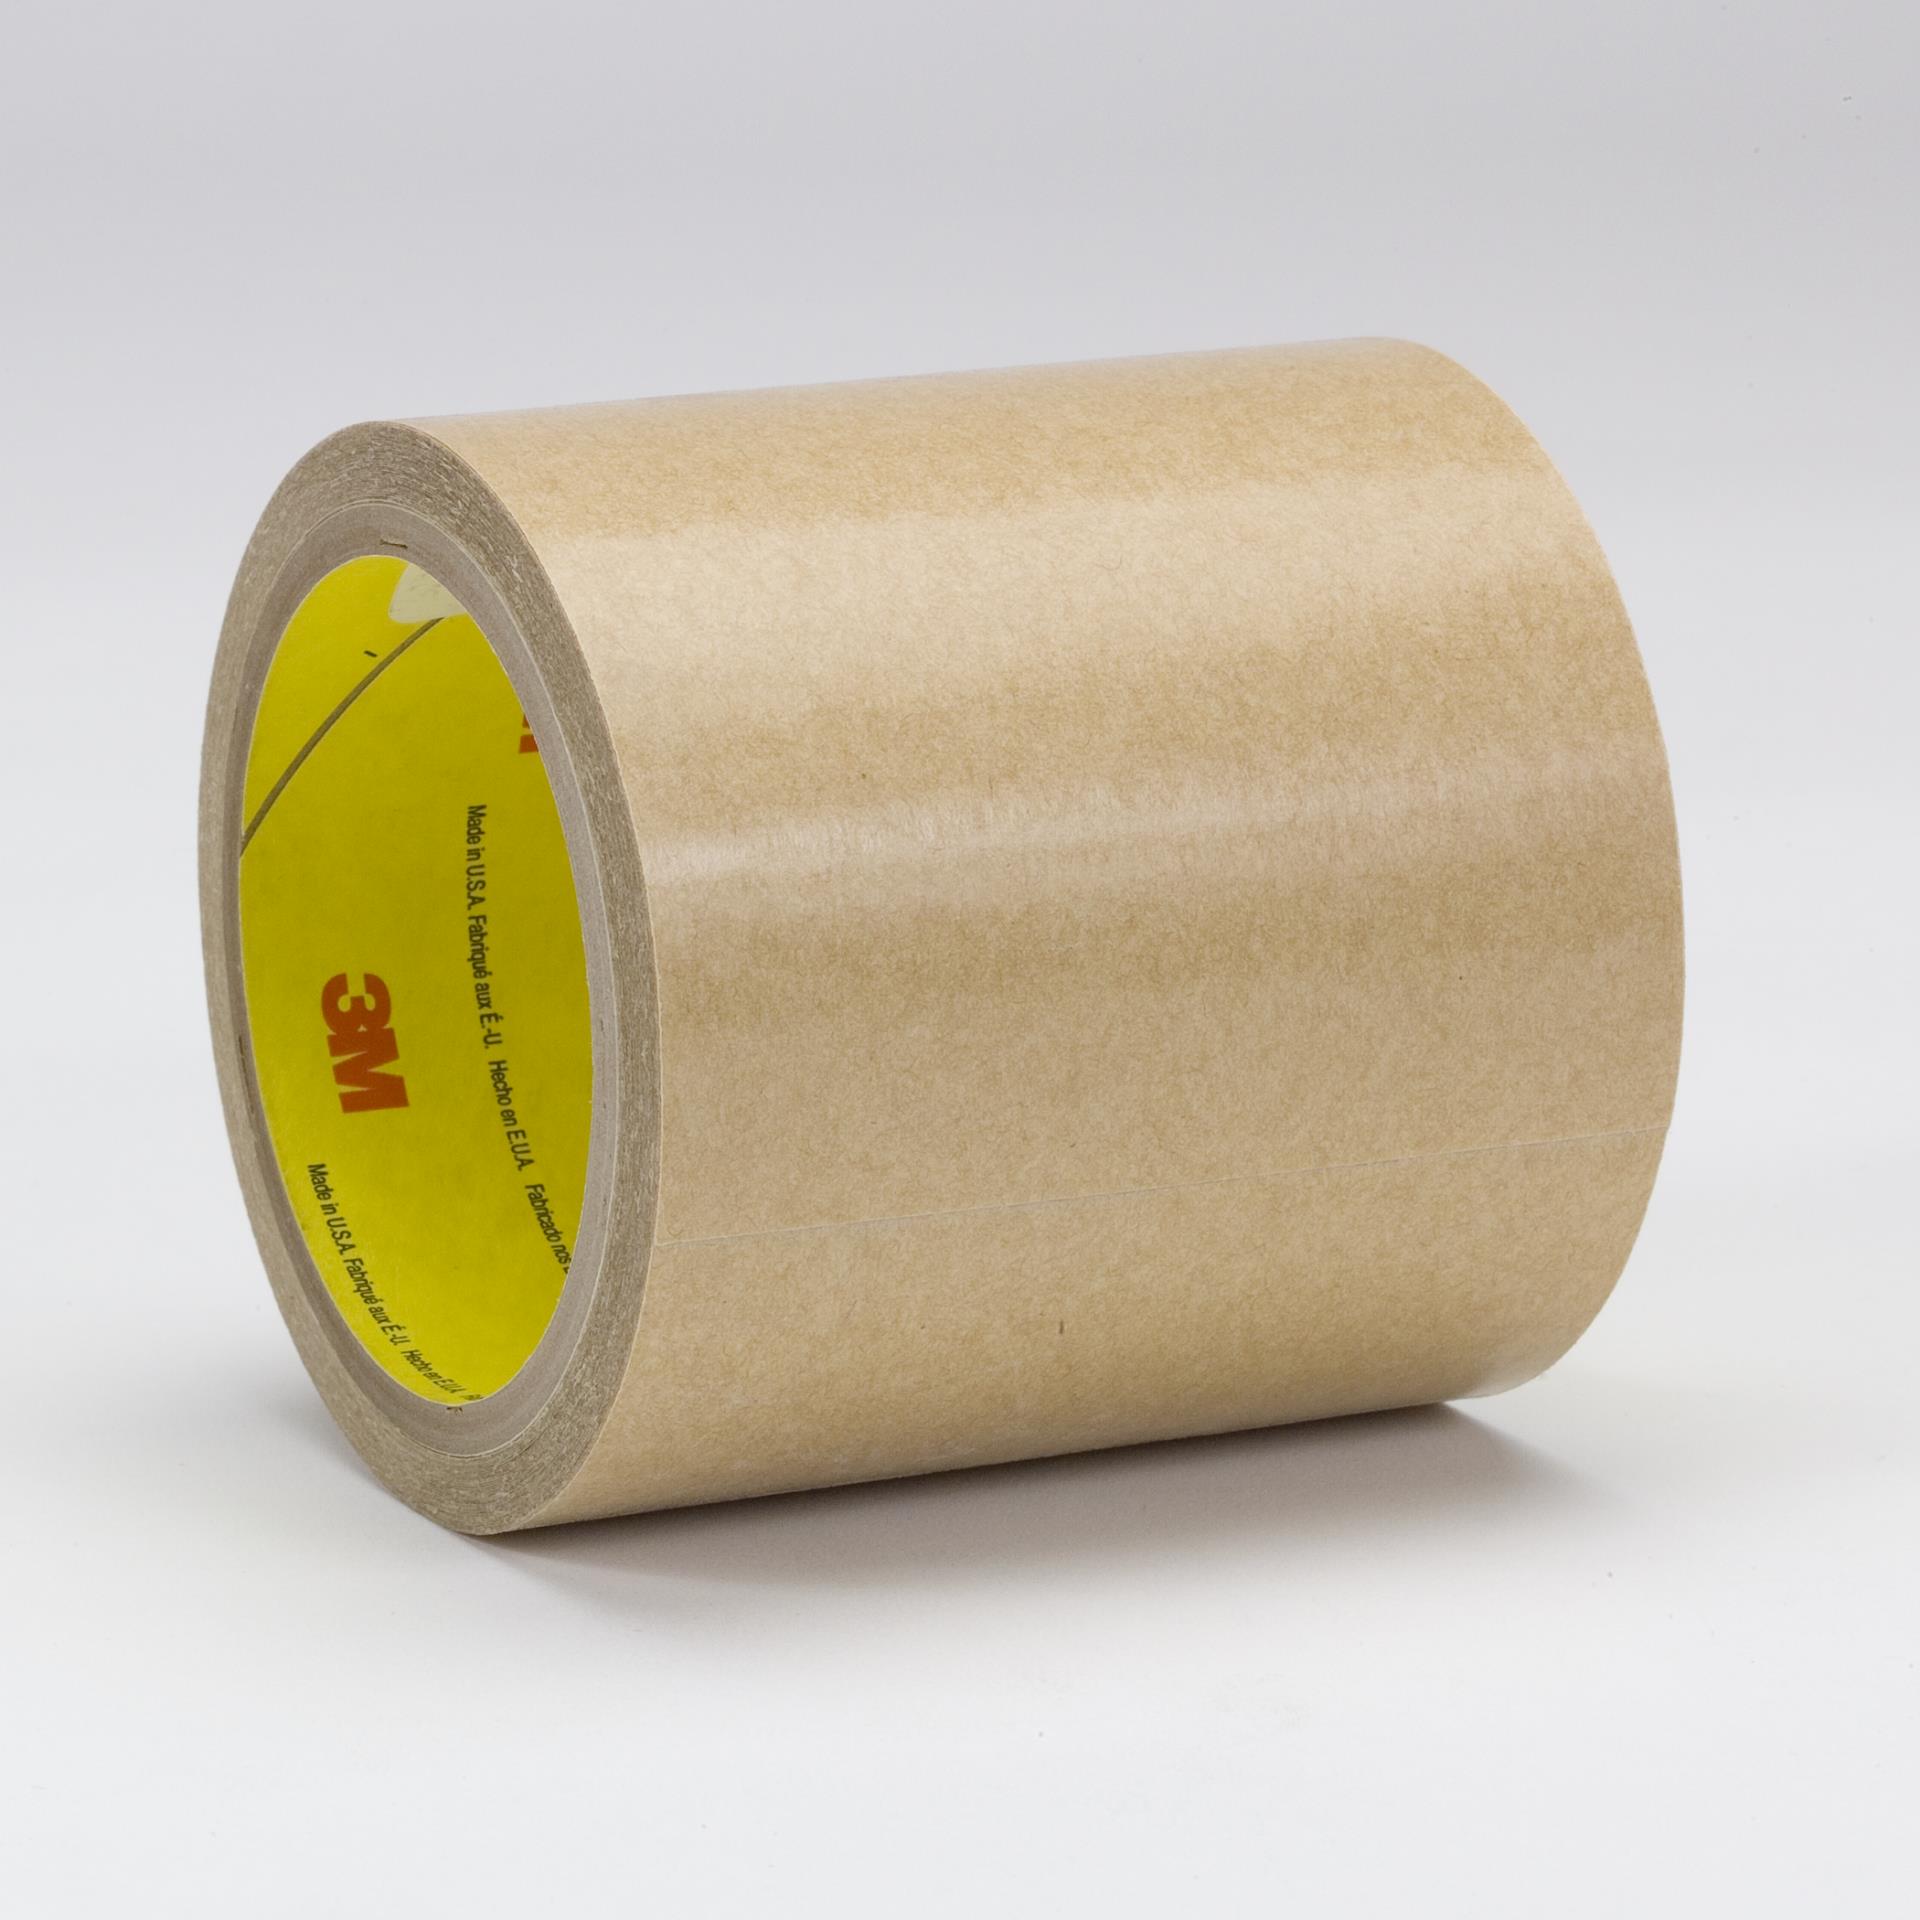 Red White Chequered Reflective Conspicuity Adhesive Tape 50 100mm/1-40 metres 